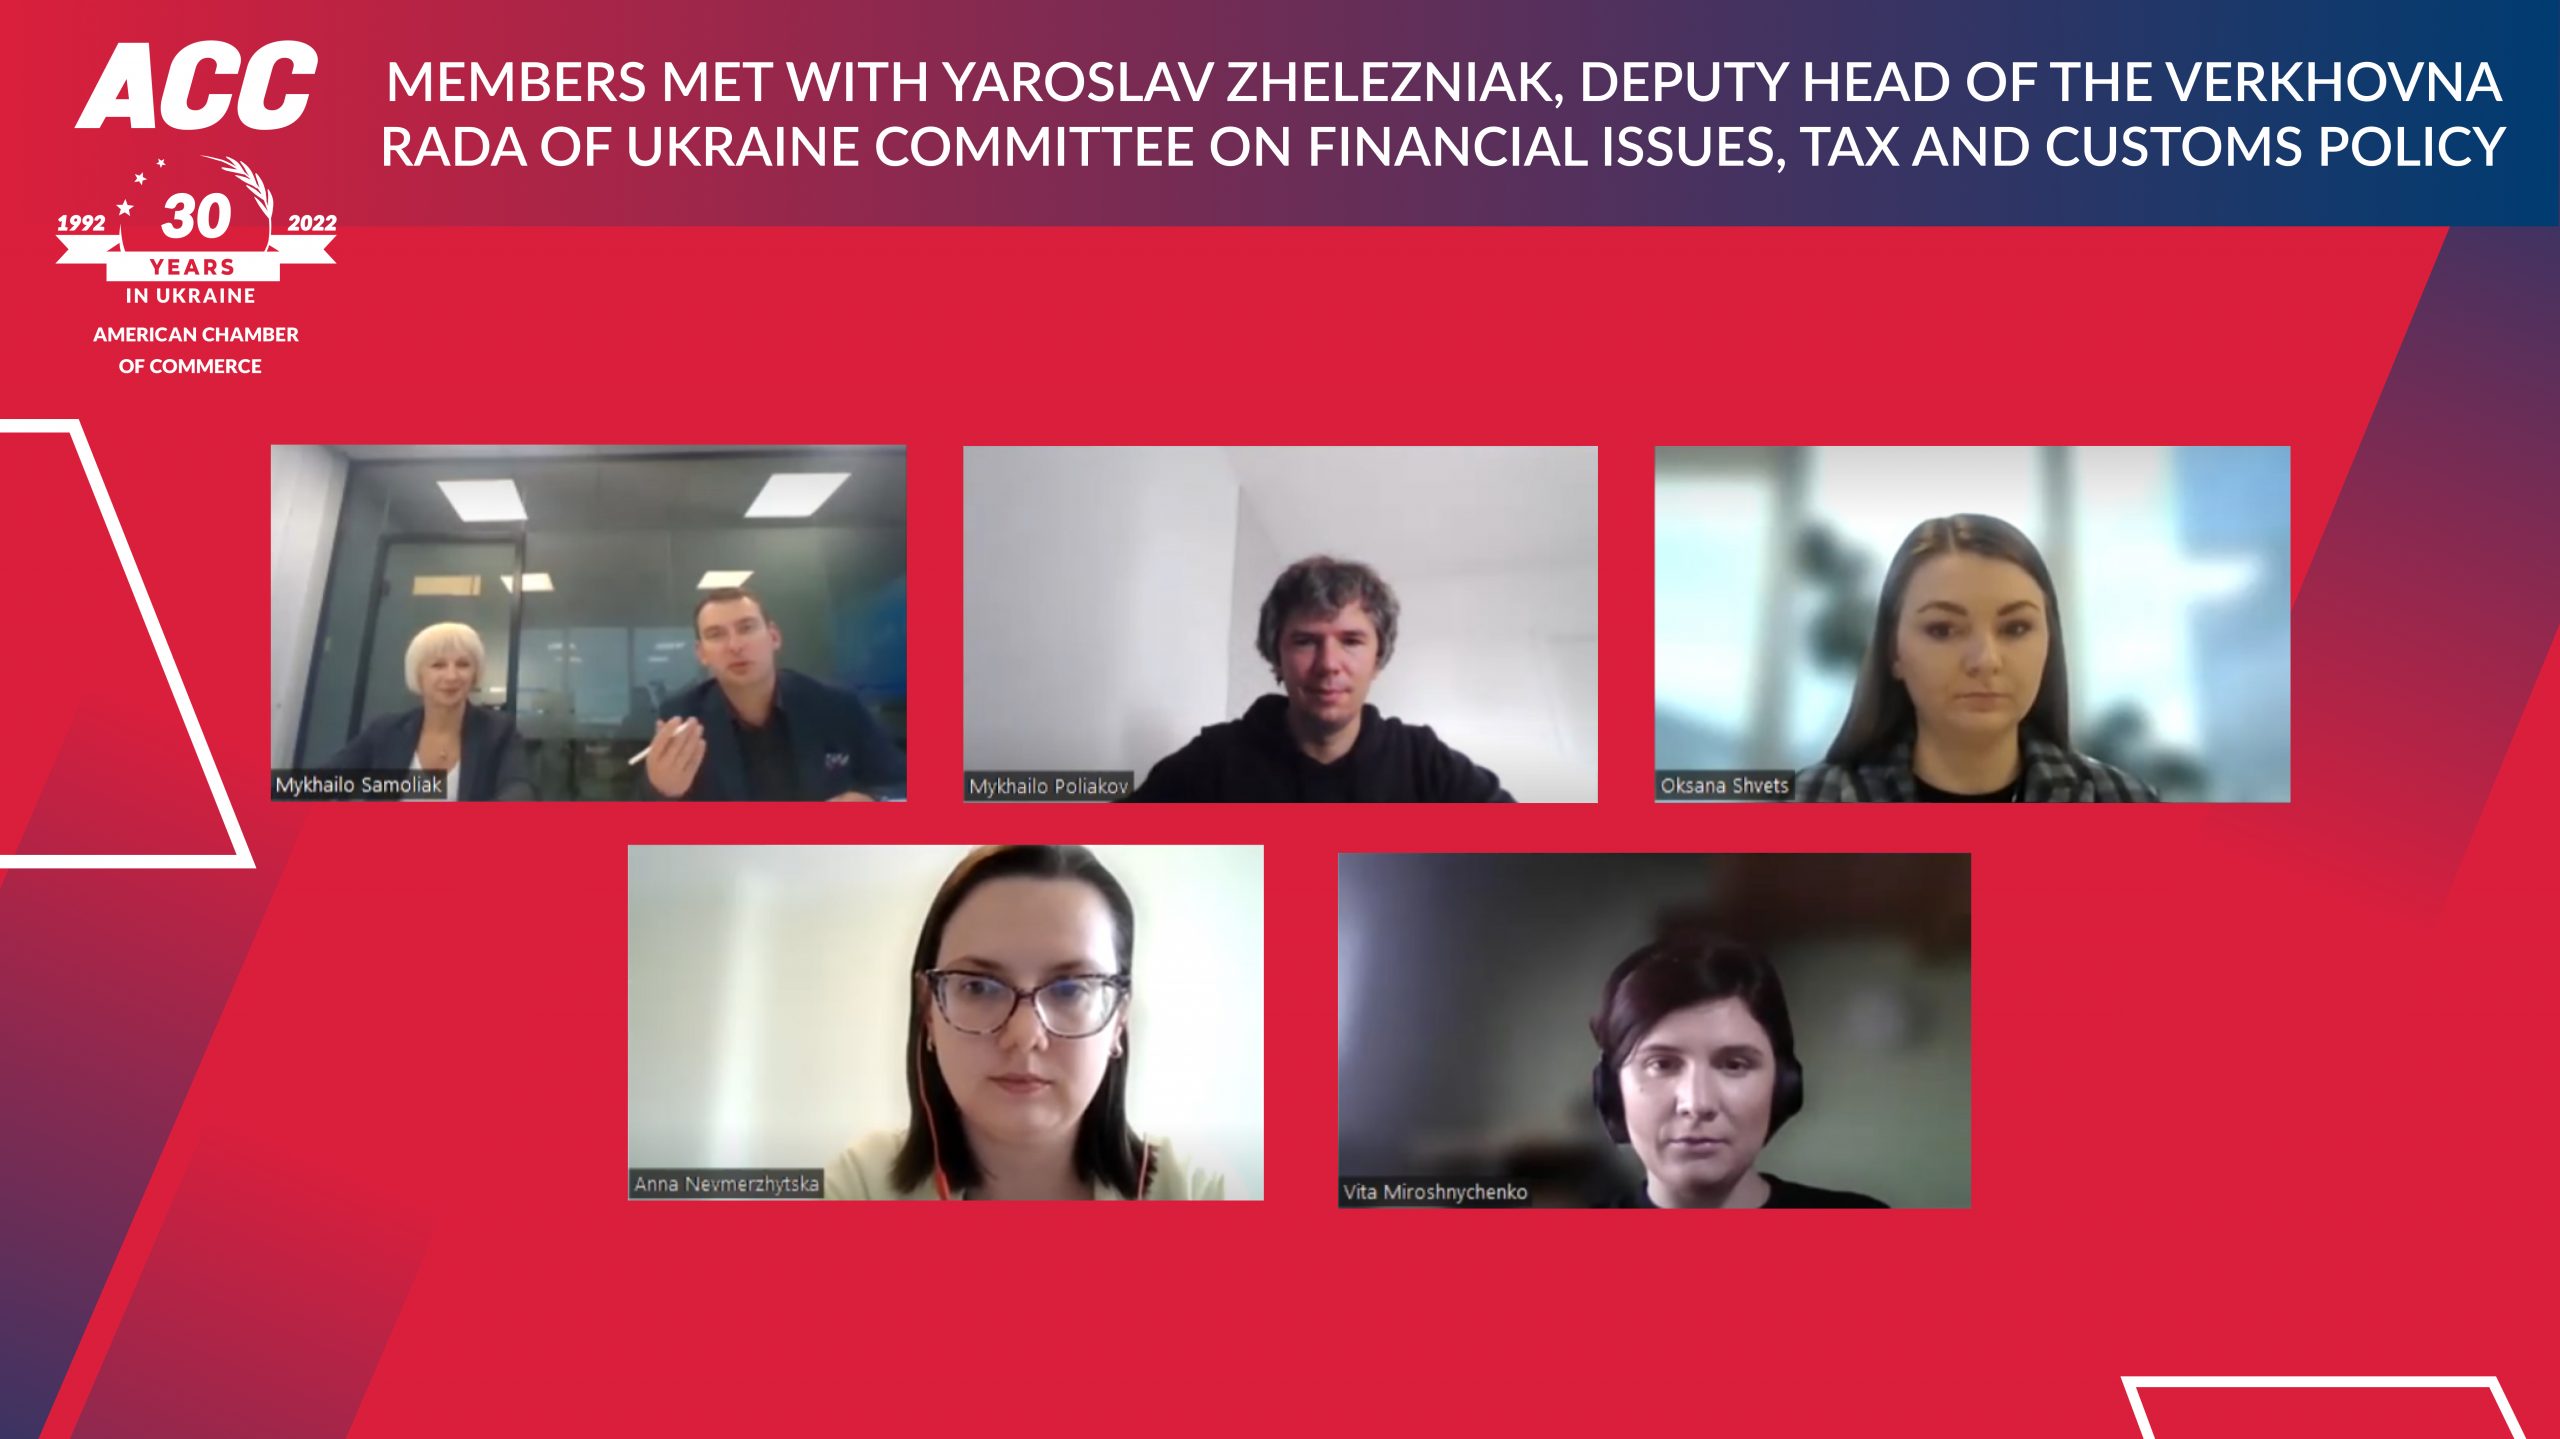 Online Meeting with Yaroslav Zhelezniak, First Deputy Head of the Parliamentary Committee on Financial Issues, Tax and Customs Policy